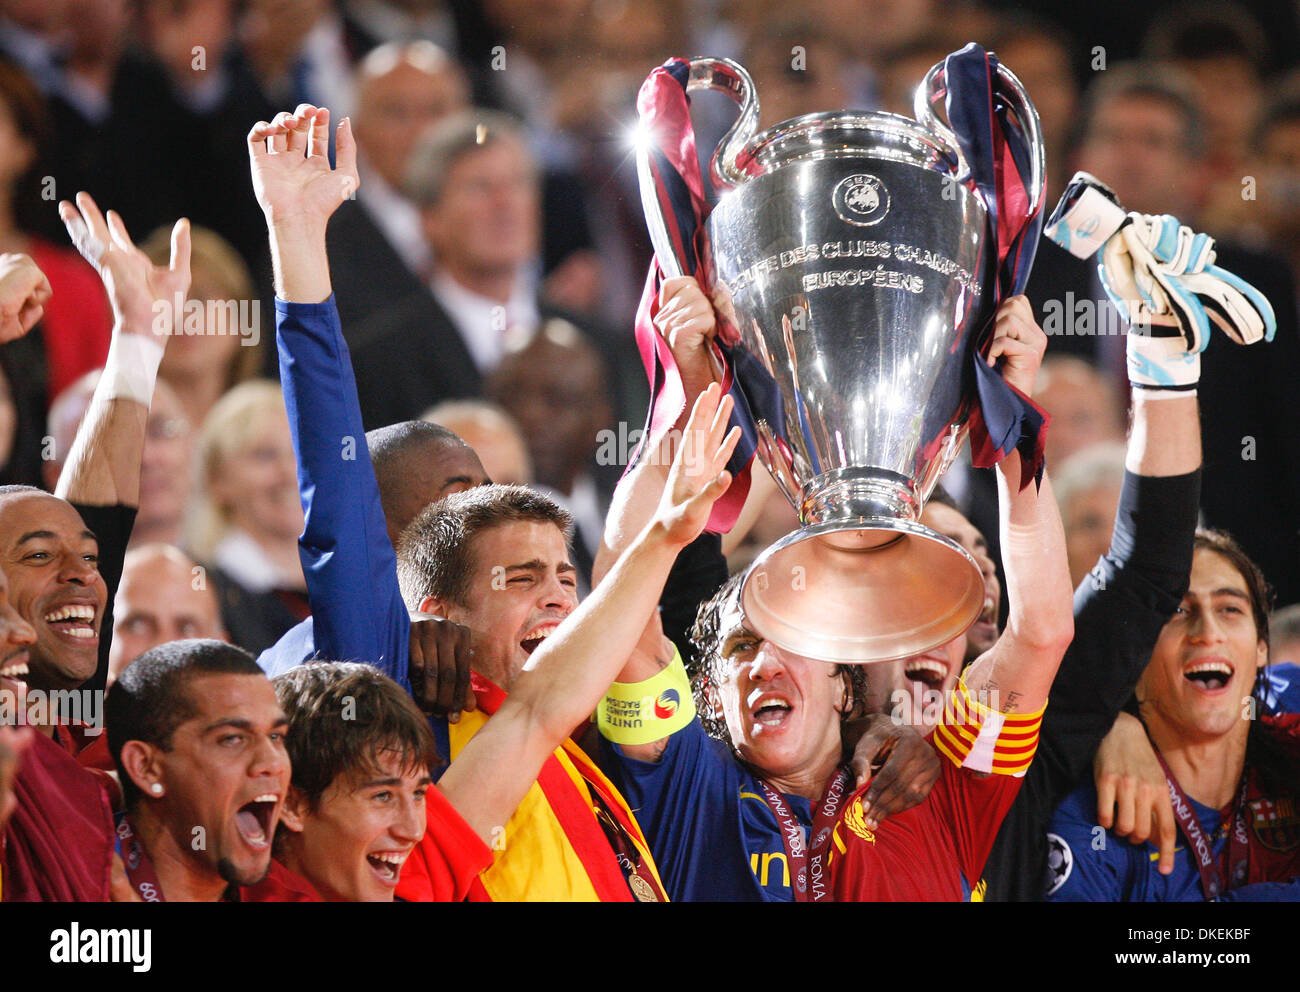 May 27, 2009 - Rome, Italy - UEFA Champions League Soccer final between  Barcelona and Manchester United at the Stadio Olimpico in Rome, Italy.  Barcelona beat Manchester United 2-0. (Credit Image: ©